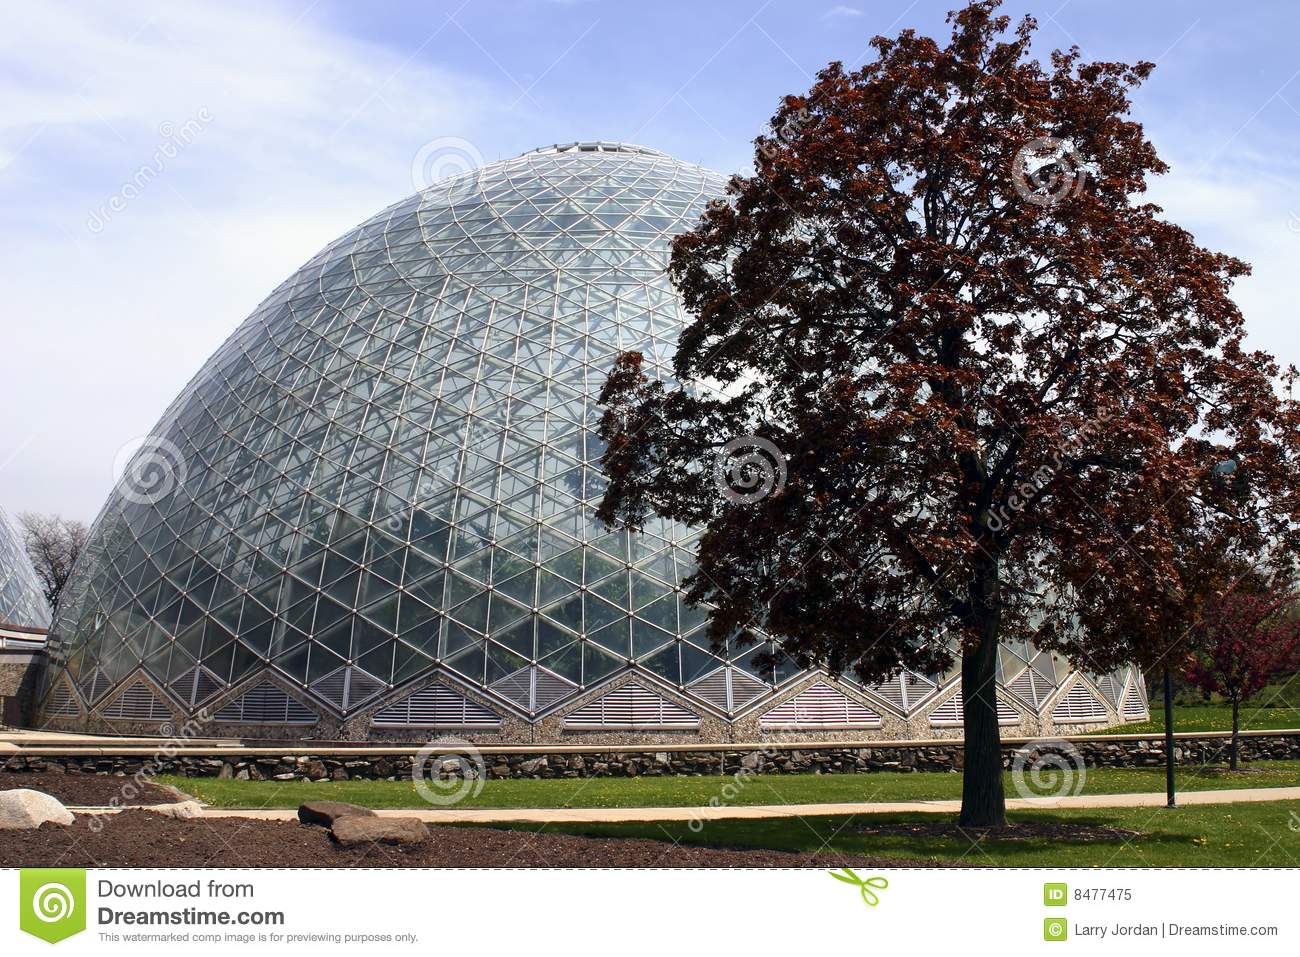 Giant Greenhouse Dome Royalty Free Stock Images.